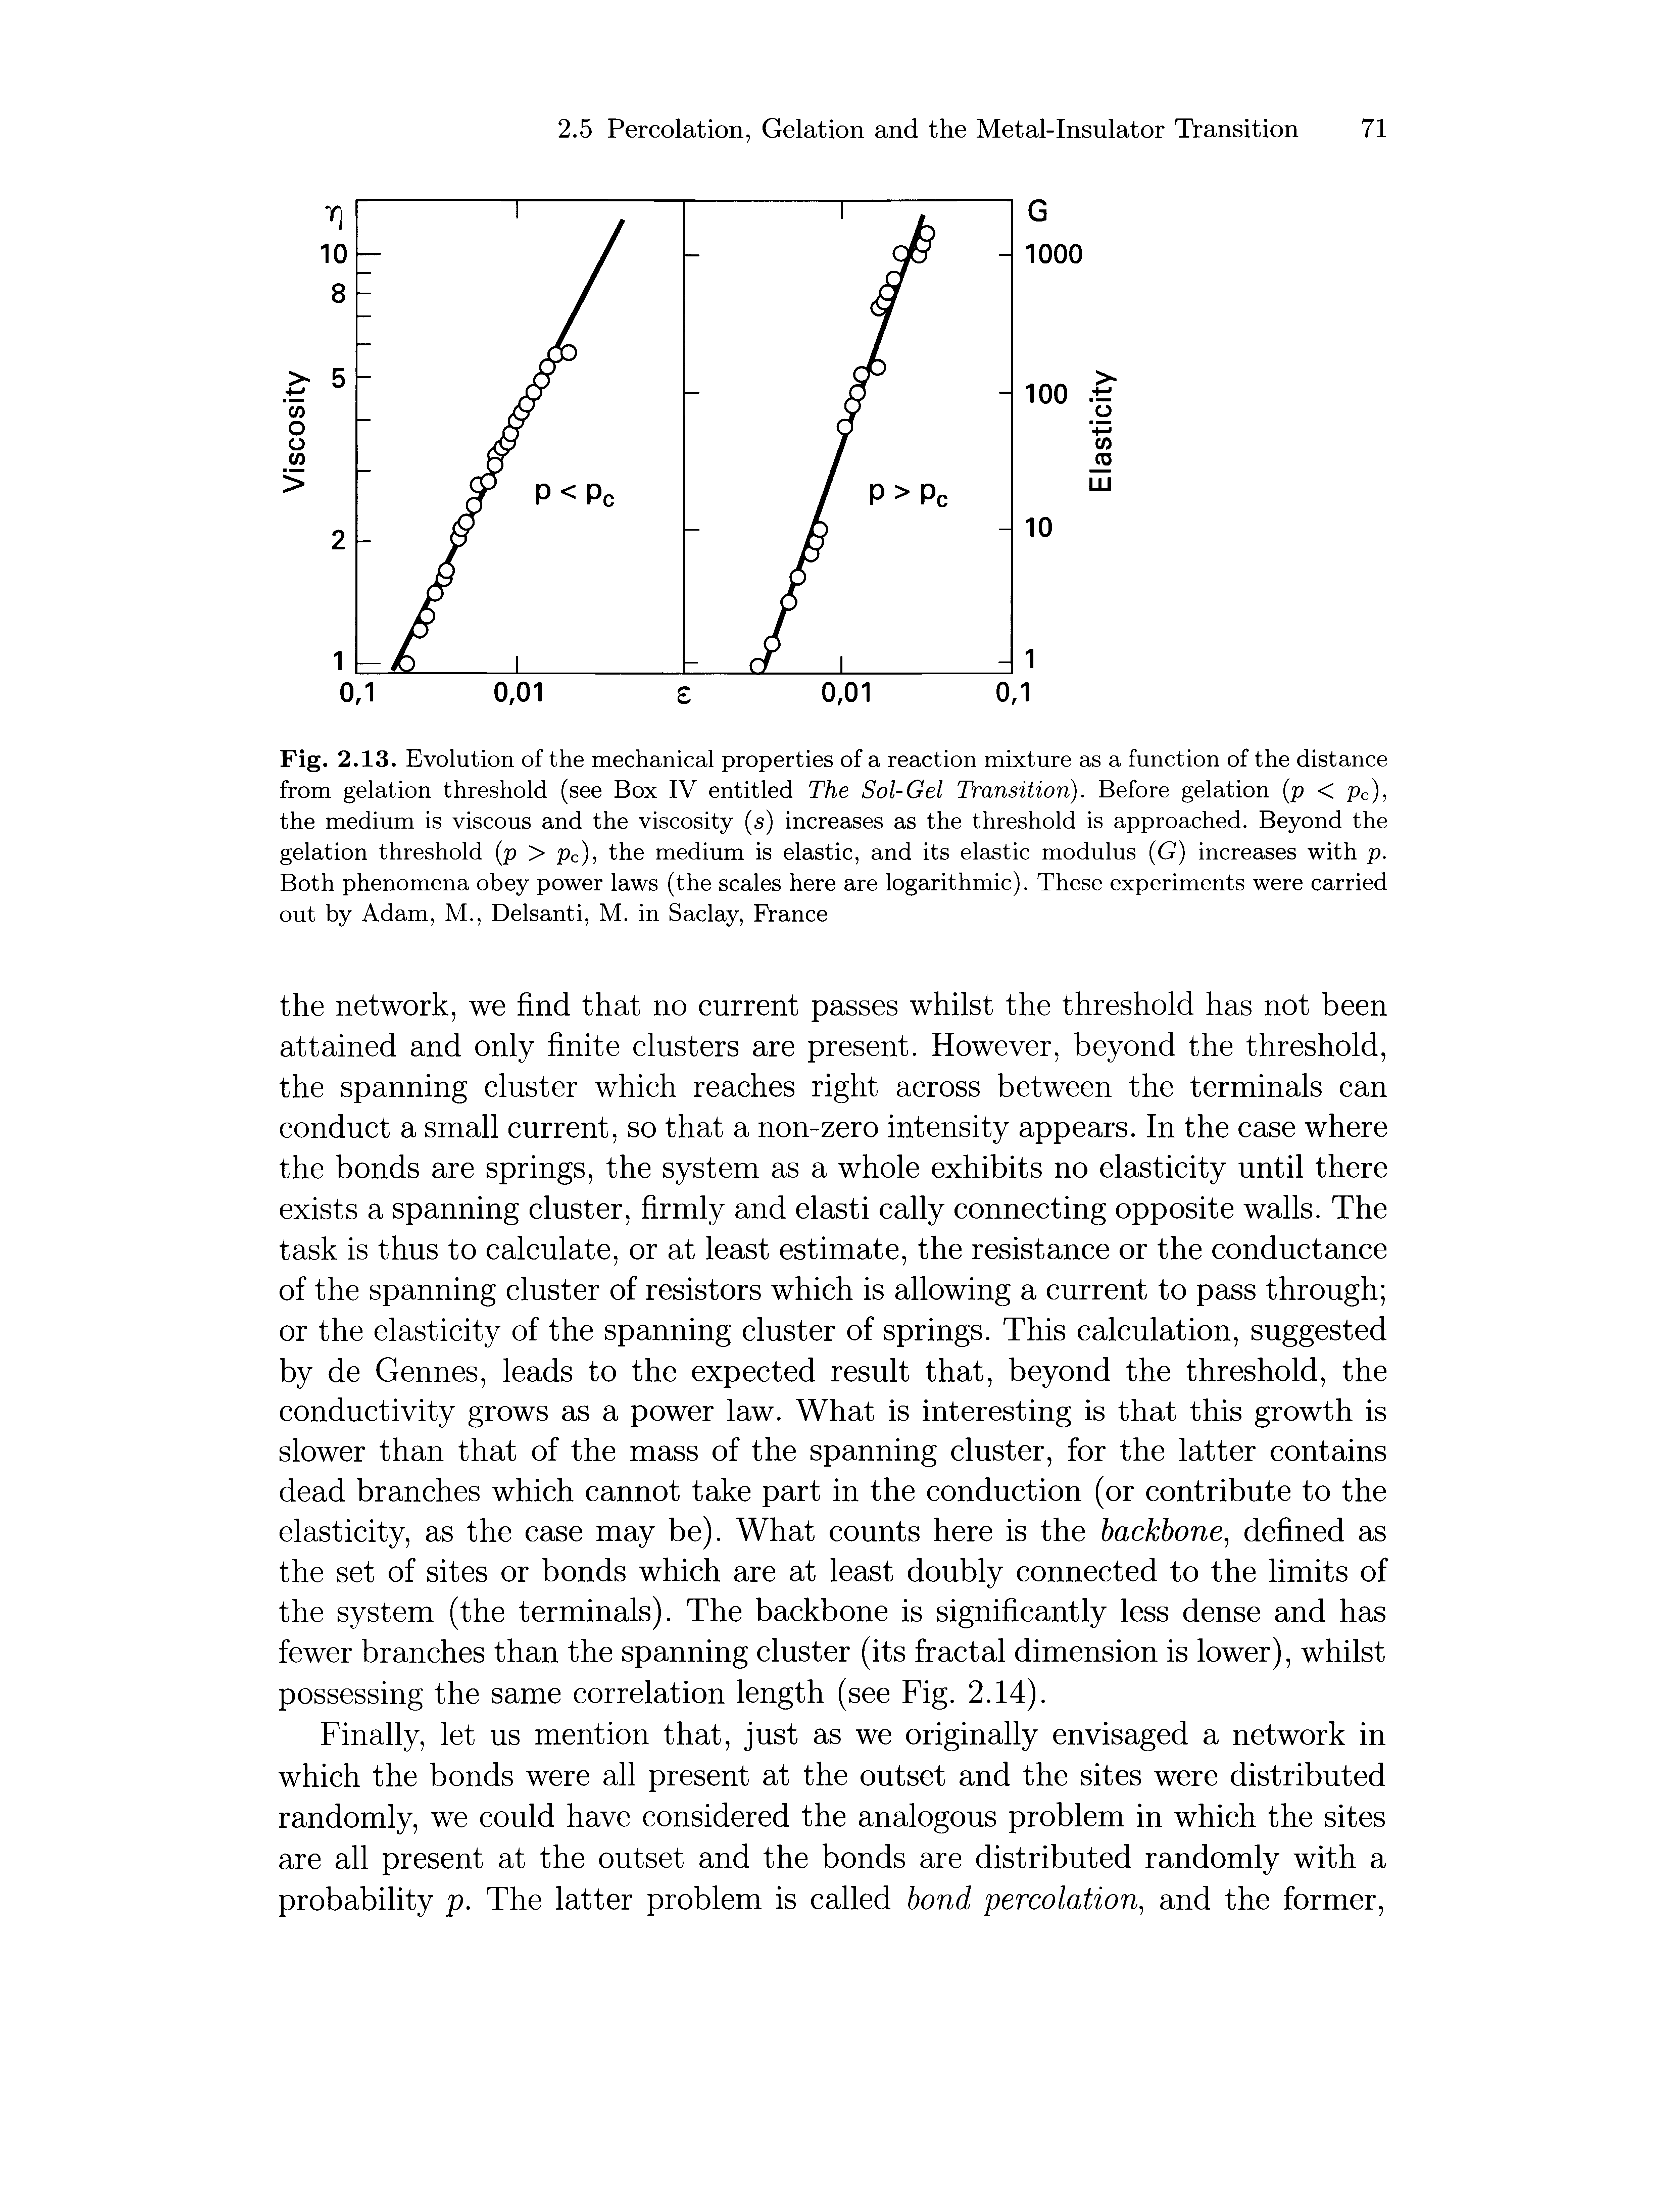 Fig. 2.13. Evolution of the mechanical properties of a reaction mixture as a function of the distance from gelation threshold (see Box IV entitled The Sol-Gel Transition). Before gelation (p < pc), the medium is viscous and the viscosity (s) increases as the threshold is approached. Beyond the gelation threshold (p > pc), the medium is elastic, and its elastic modulus G) increases with p. Both phenomena obey power laws (the scales here are logarithmic). These experiments were carried out by Adam, M., Delsanti, M. in Saclay, France...